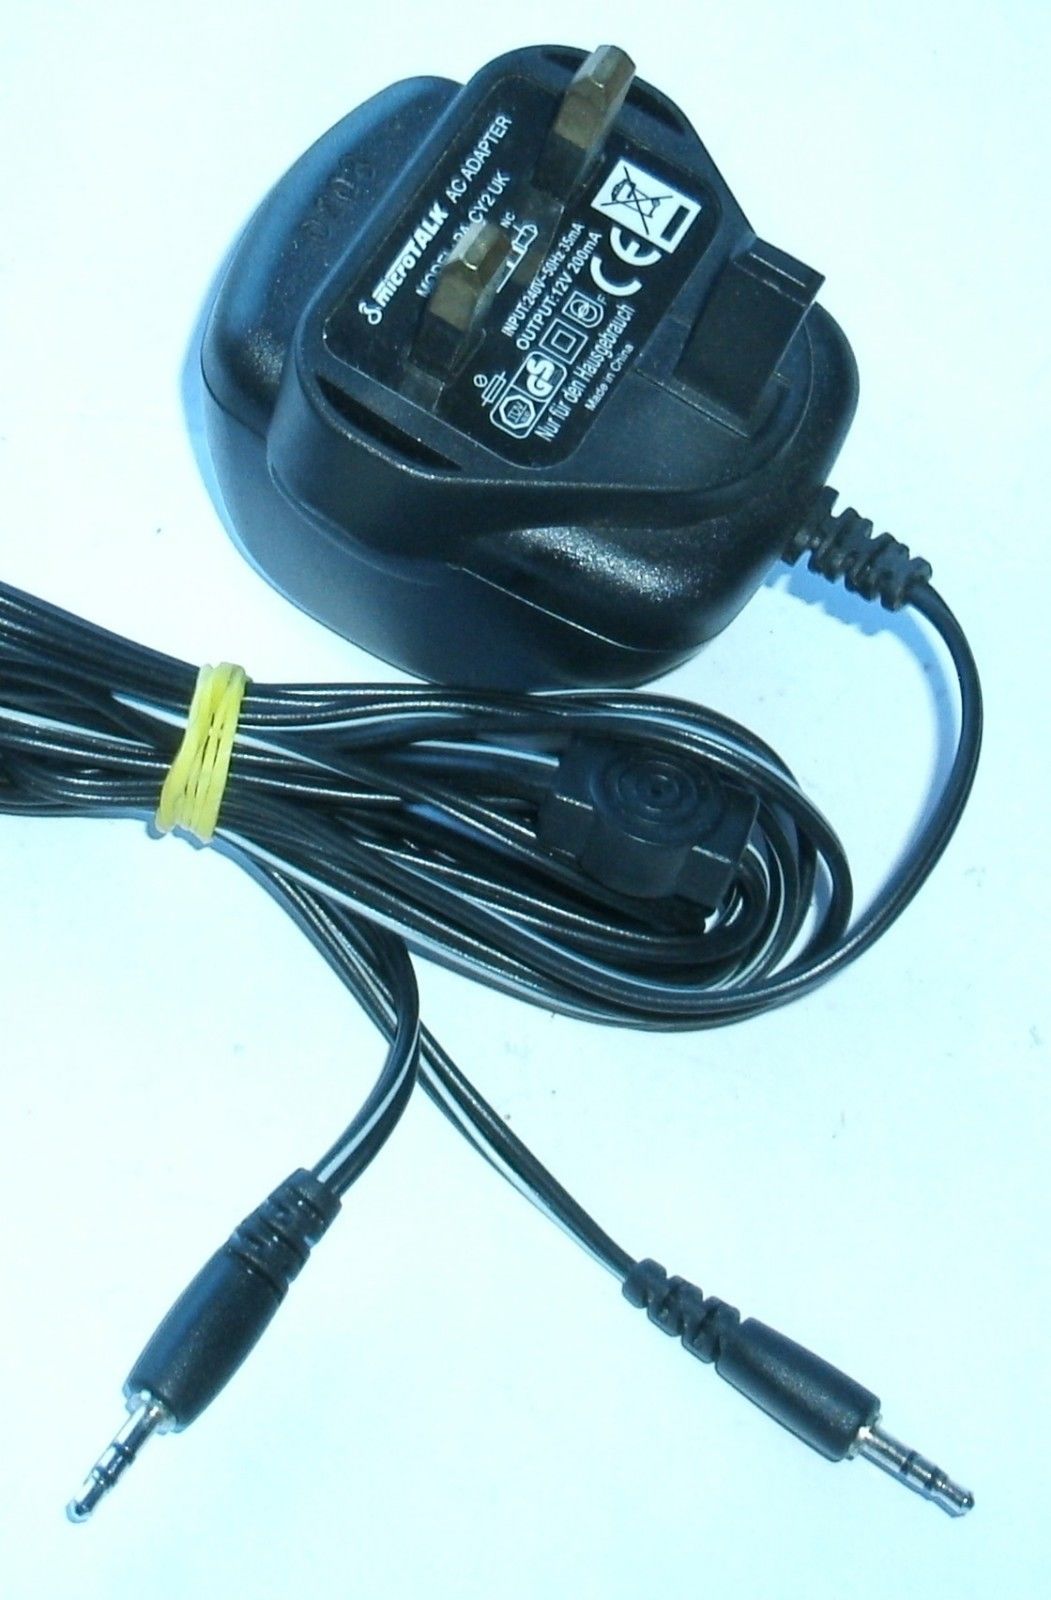 NEW 12V 200mA MICROTALK PA-CY2 AC ADAPTER